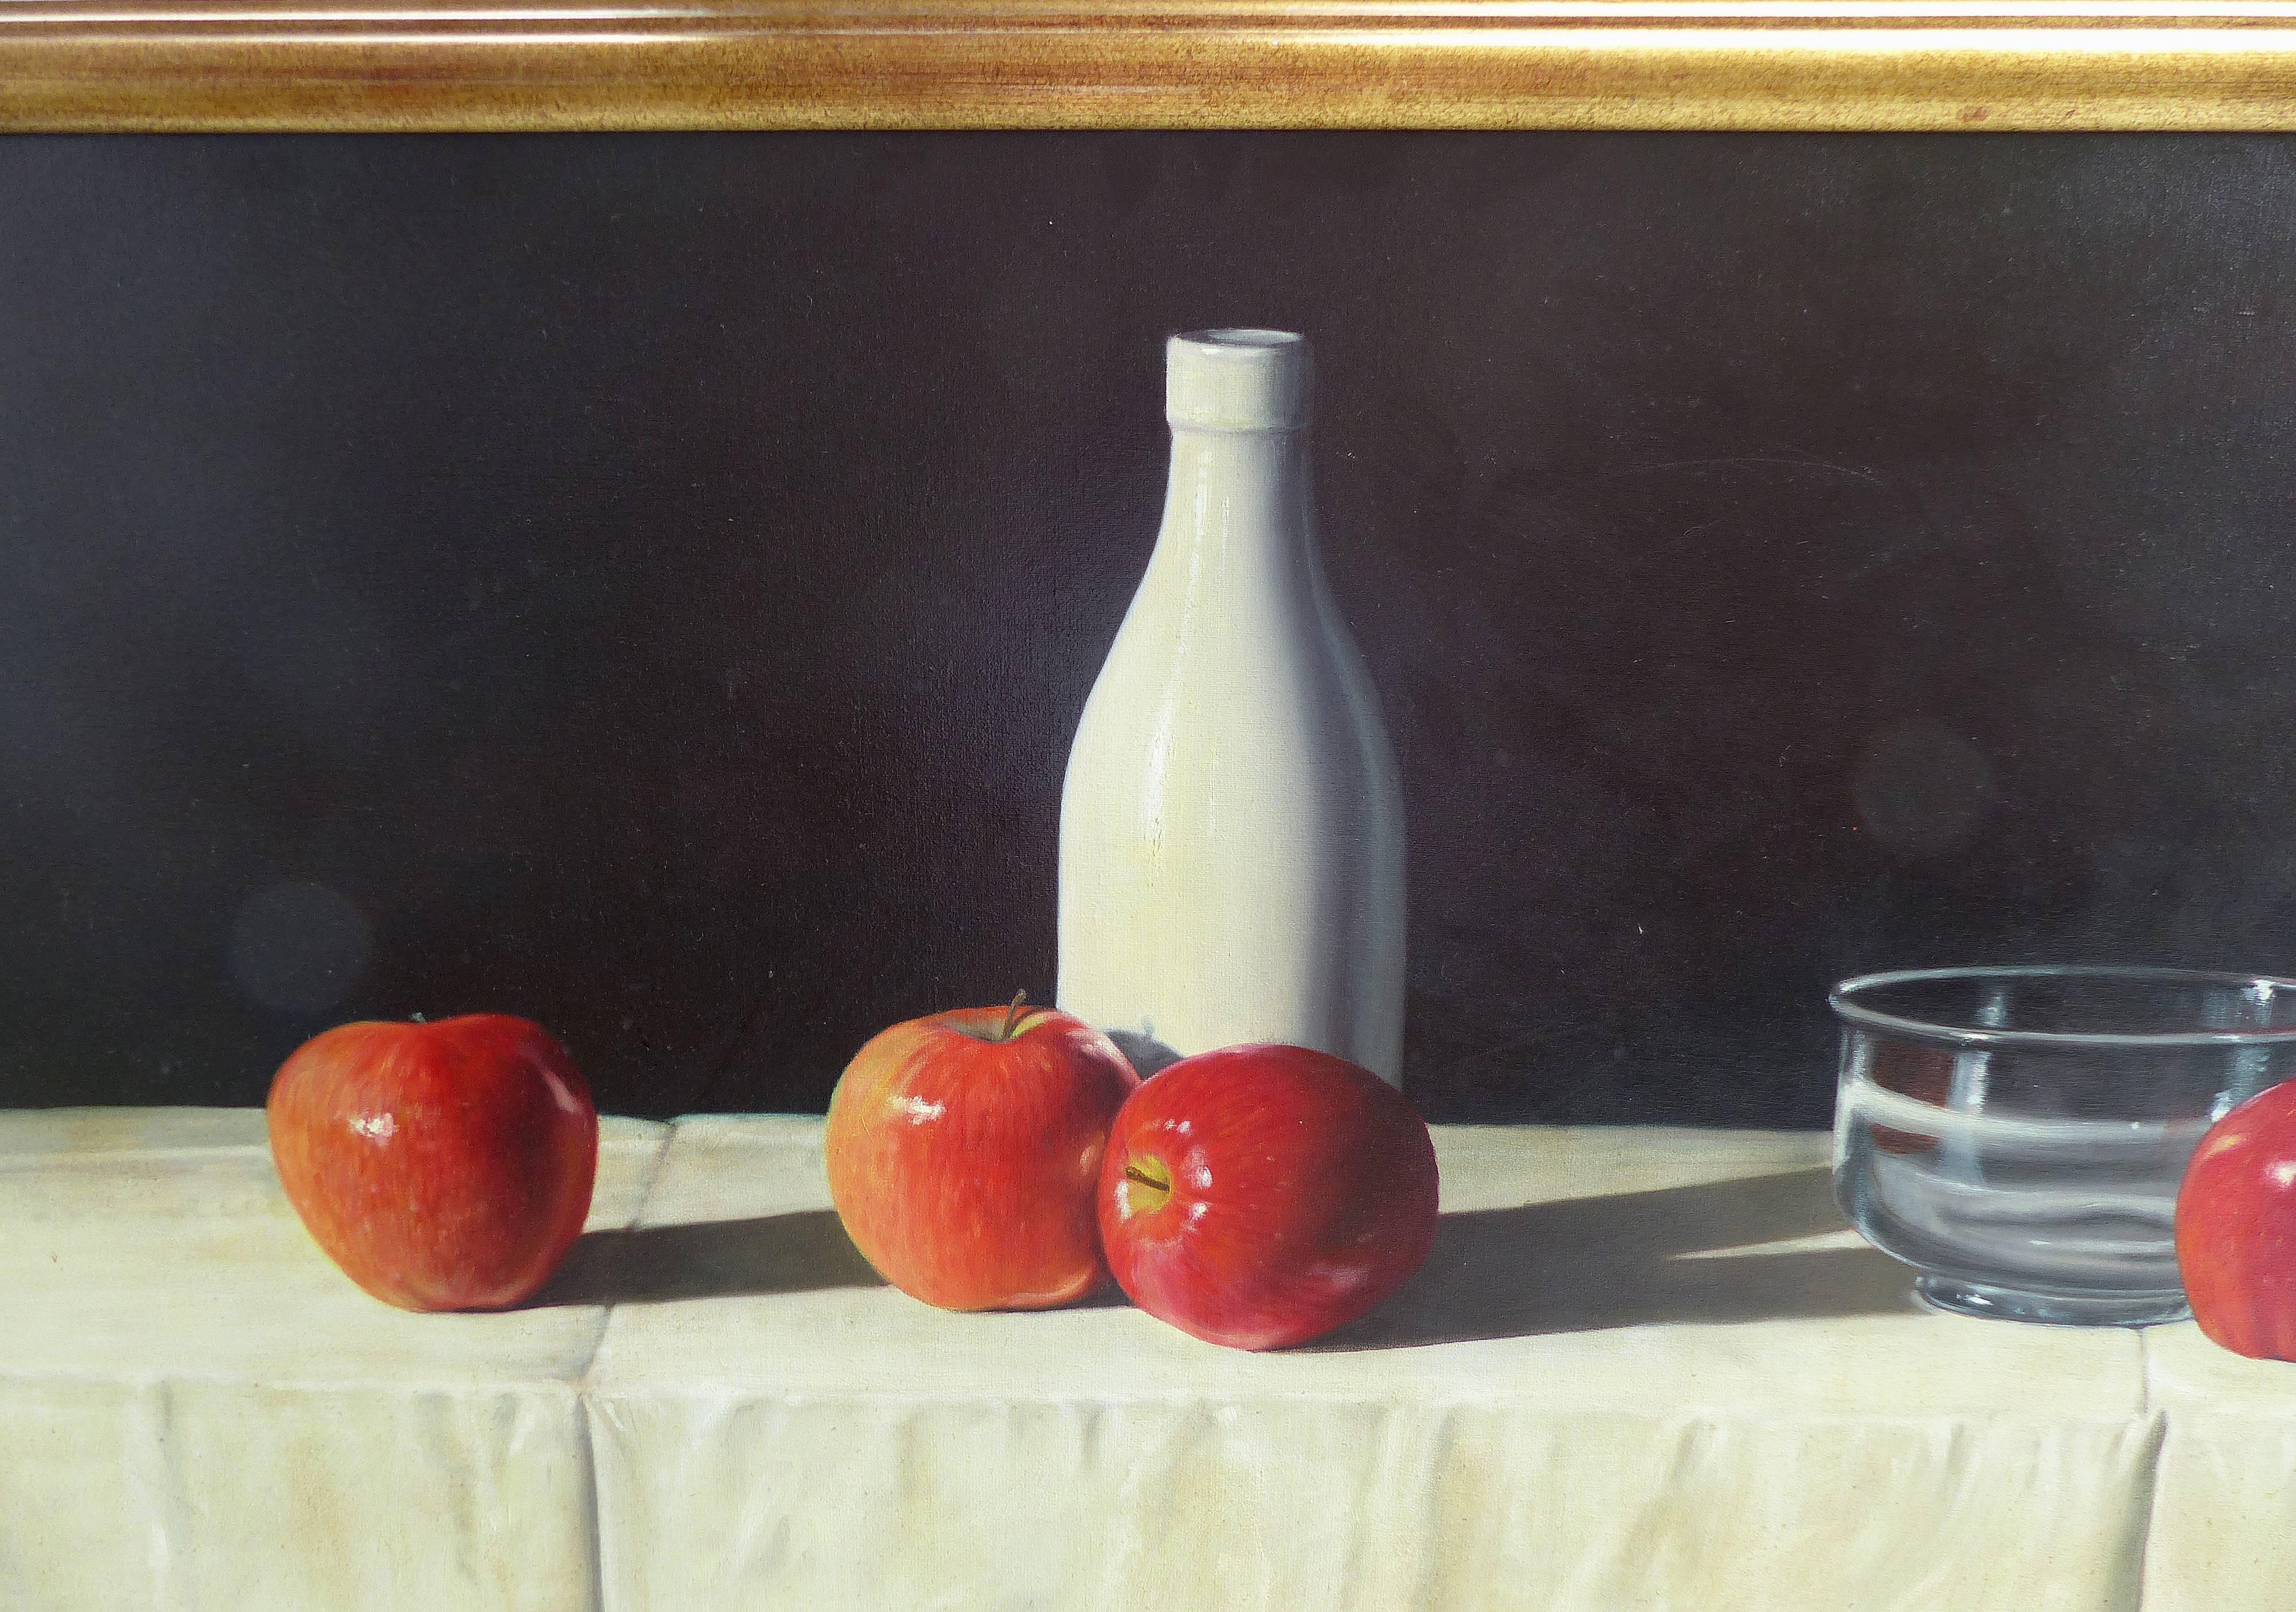 

Oil painting on canvas by Argentine artist, G.B. Valverde. Signed lower right and on verso and dated 2004. This still life depicts a table with a draped tablecloth and a bottle with apples and a clear glass bowl against a black background.